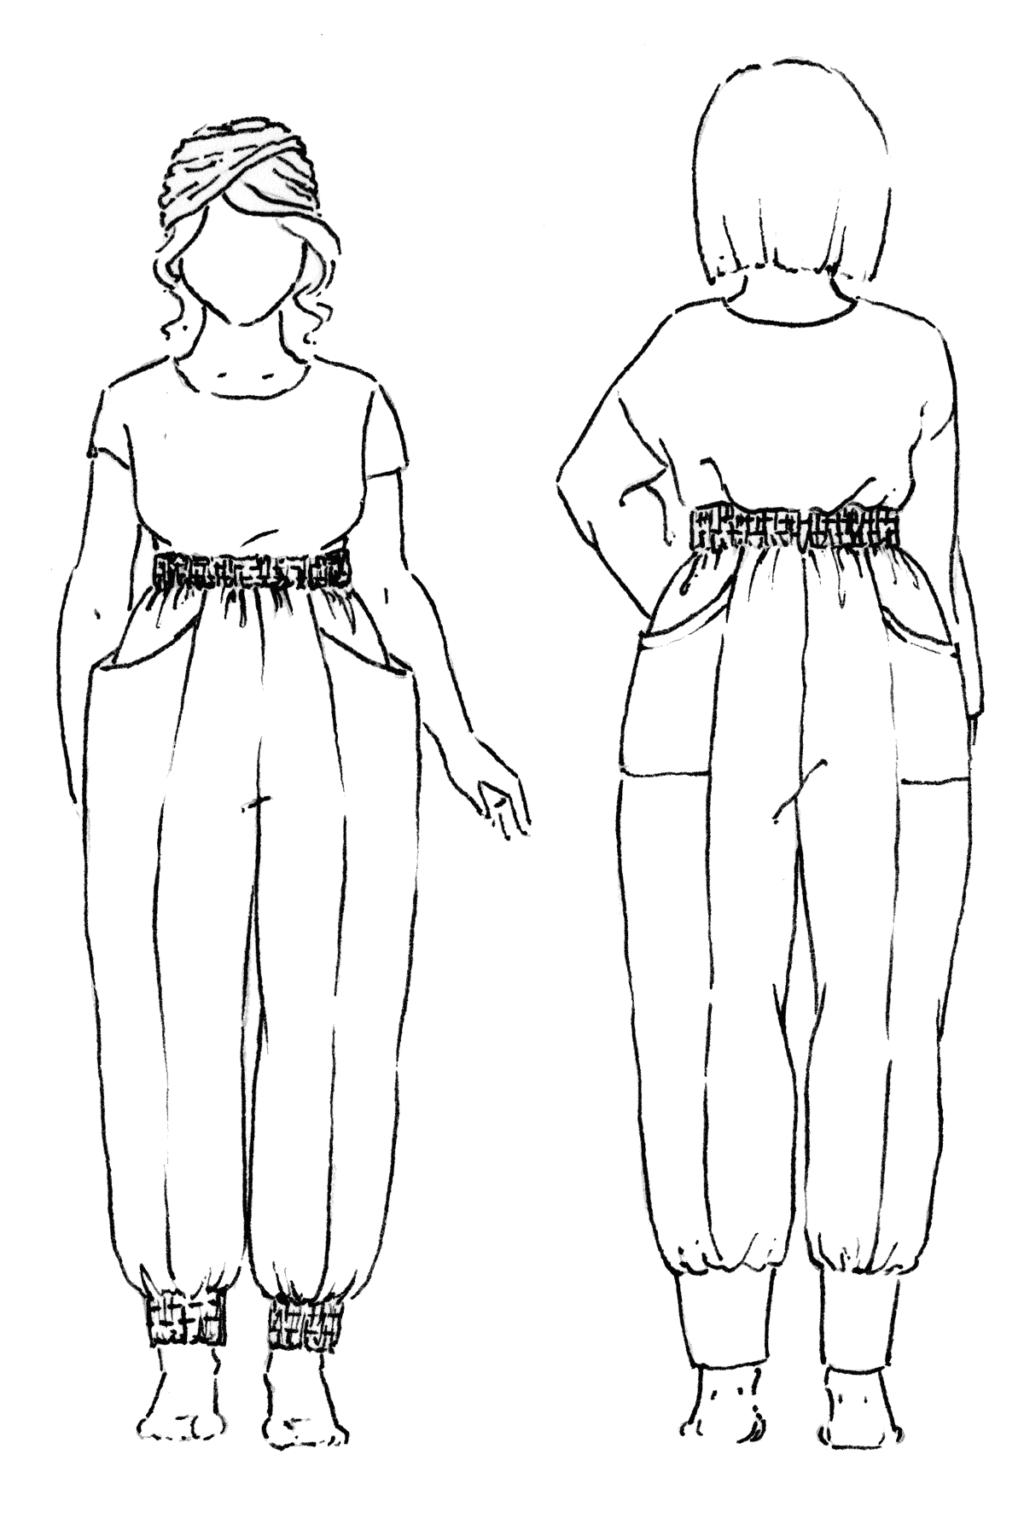 Styled Croquis drawing of the Arenite Pants sewing pattern